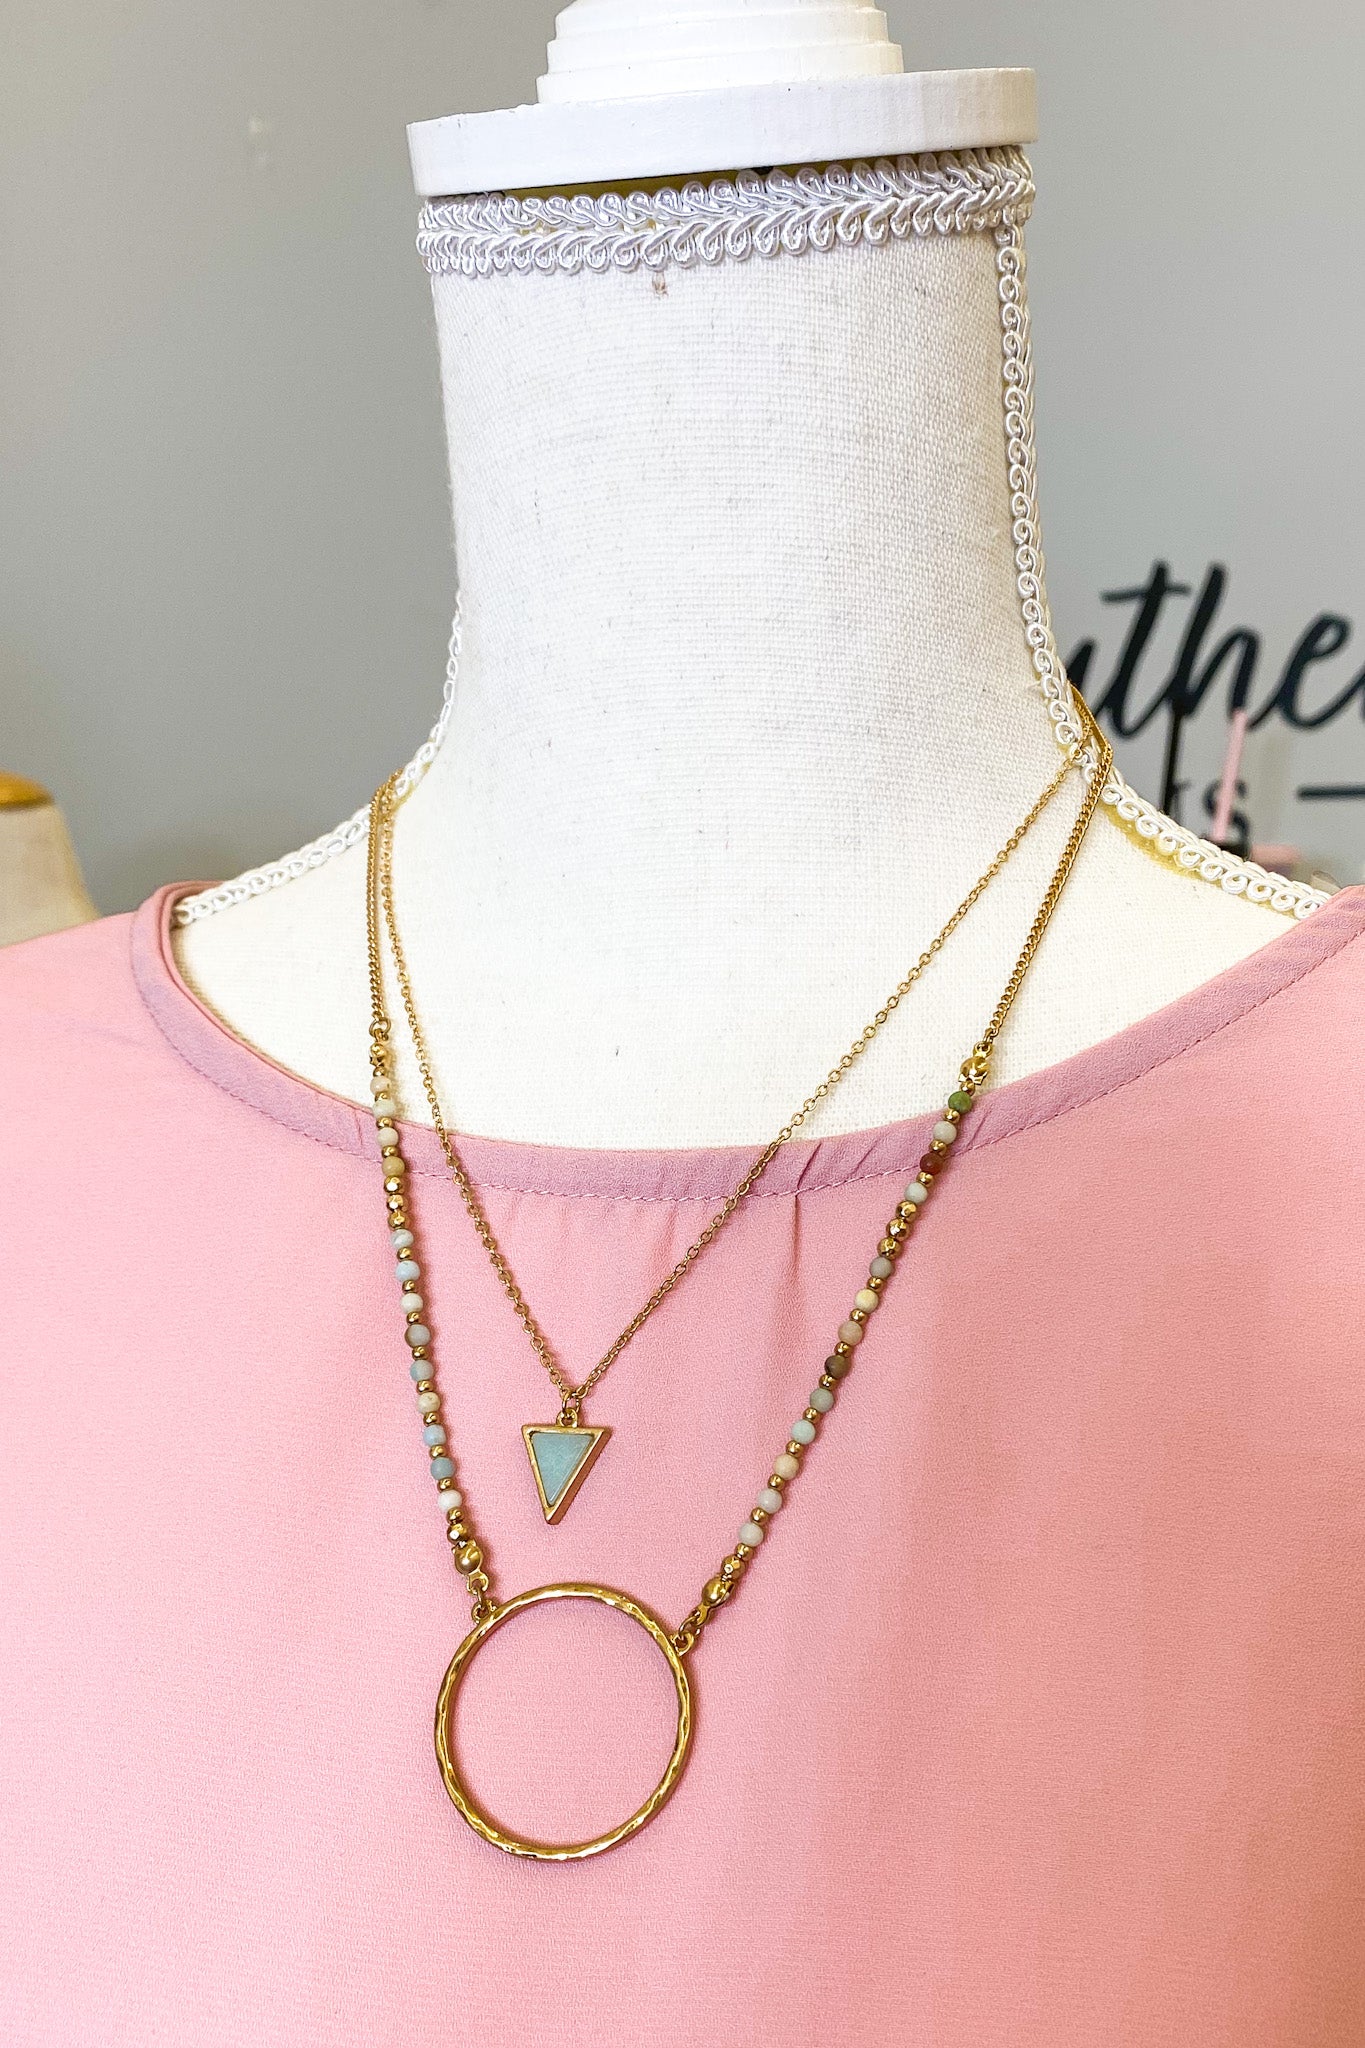 SALE | Layered Necklace with Teal stones